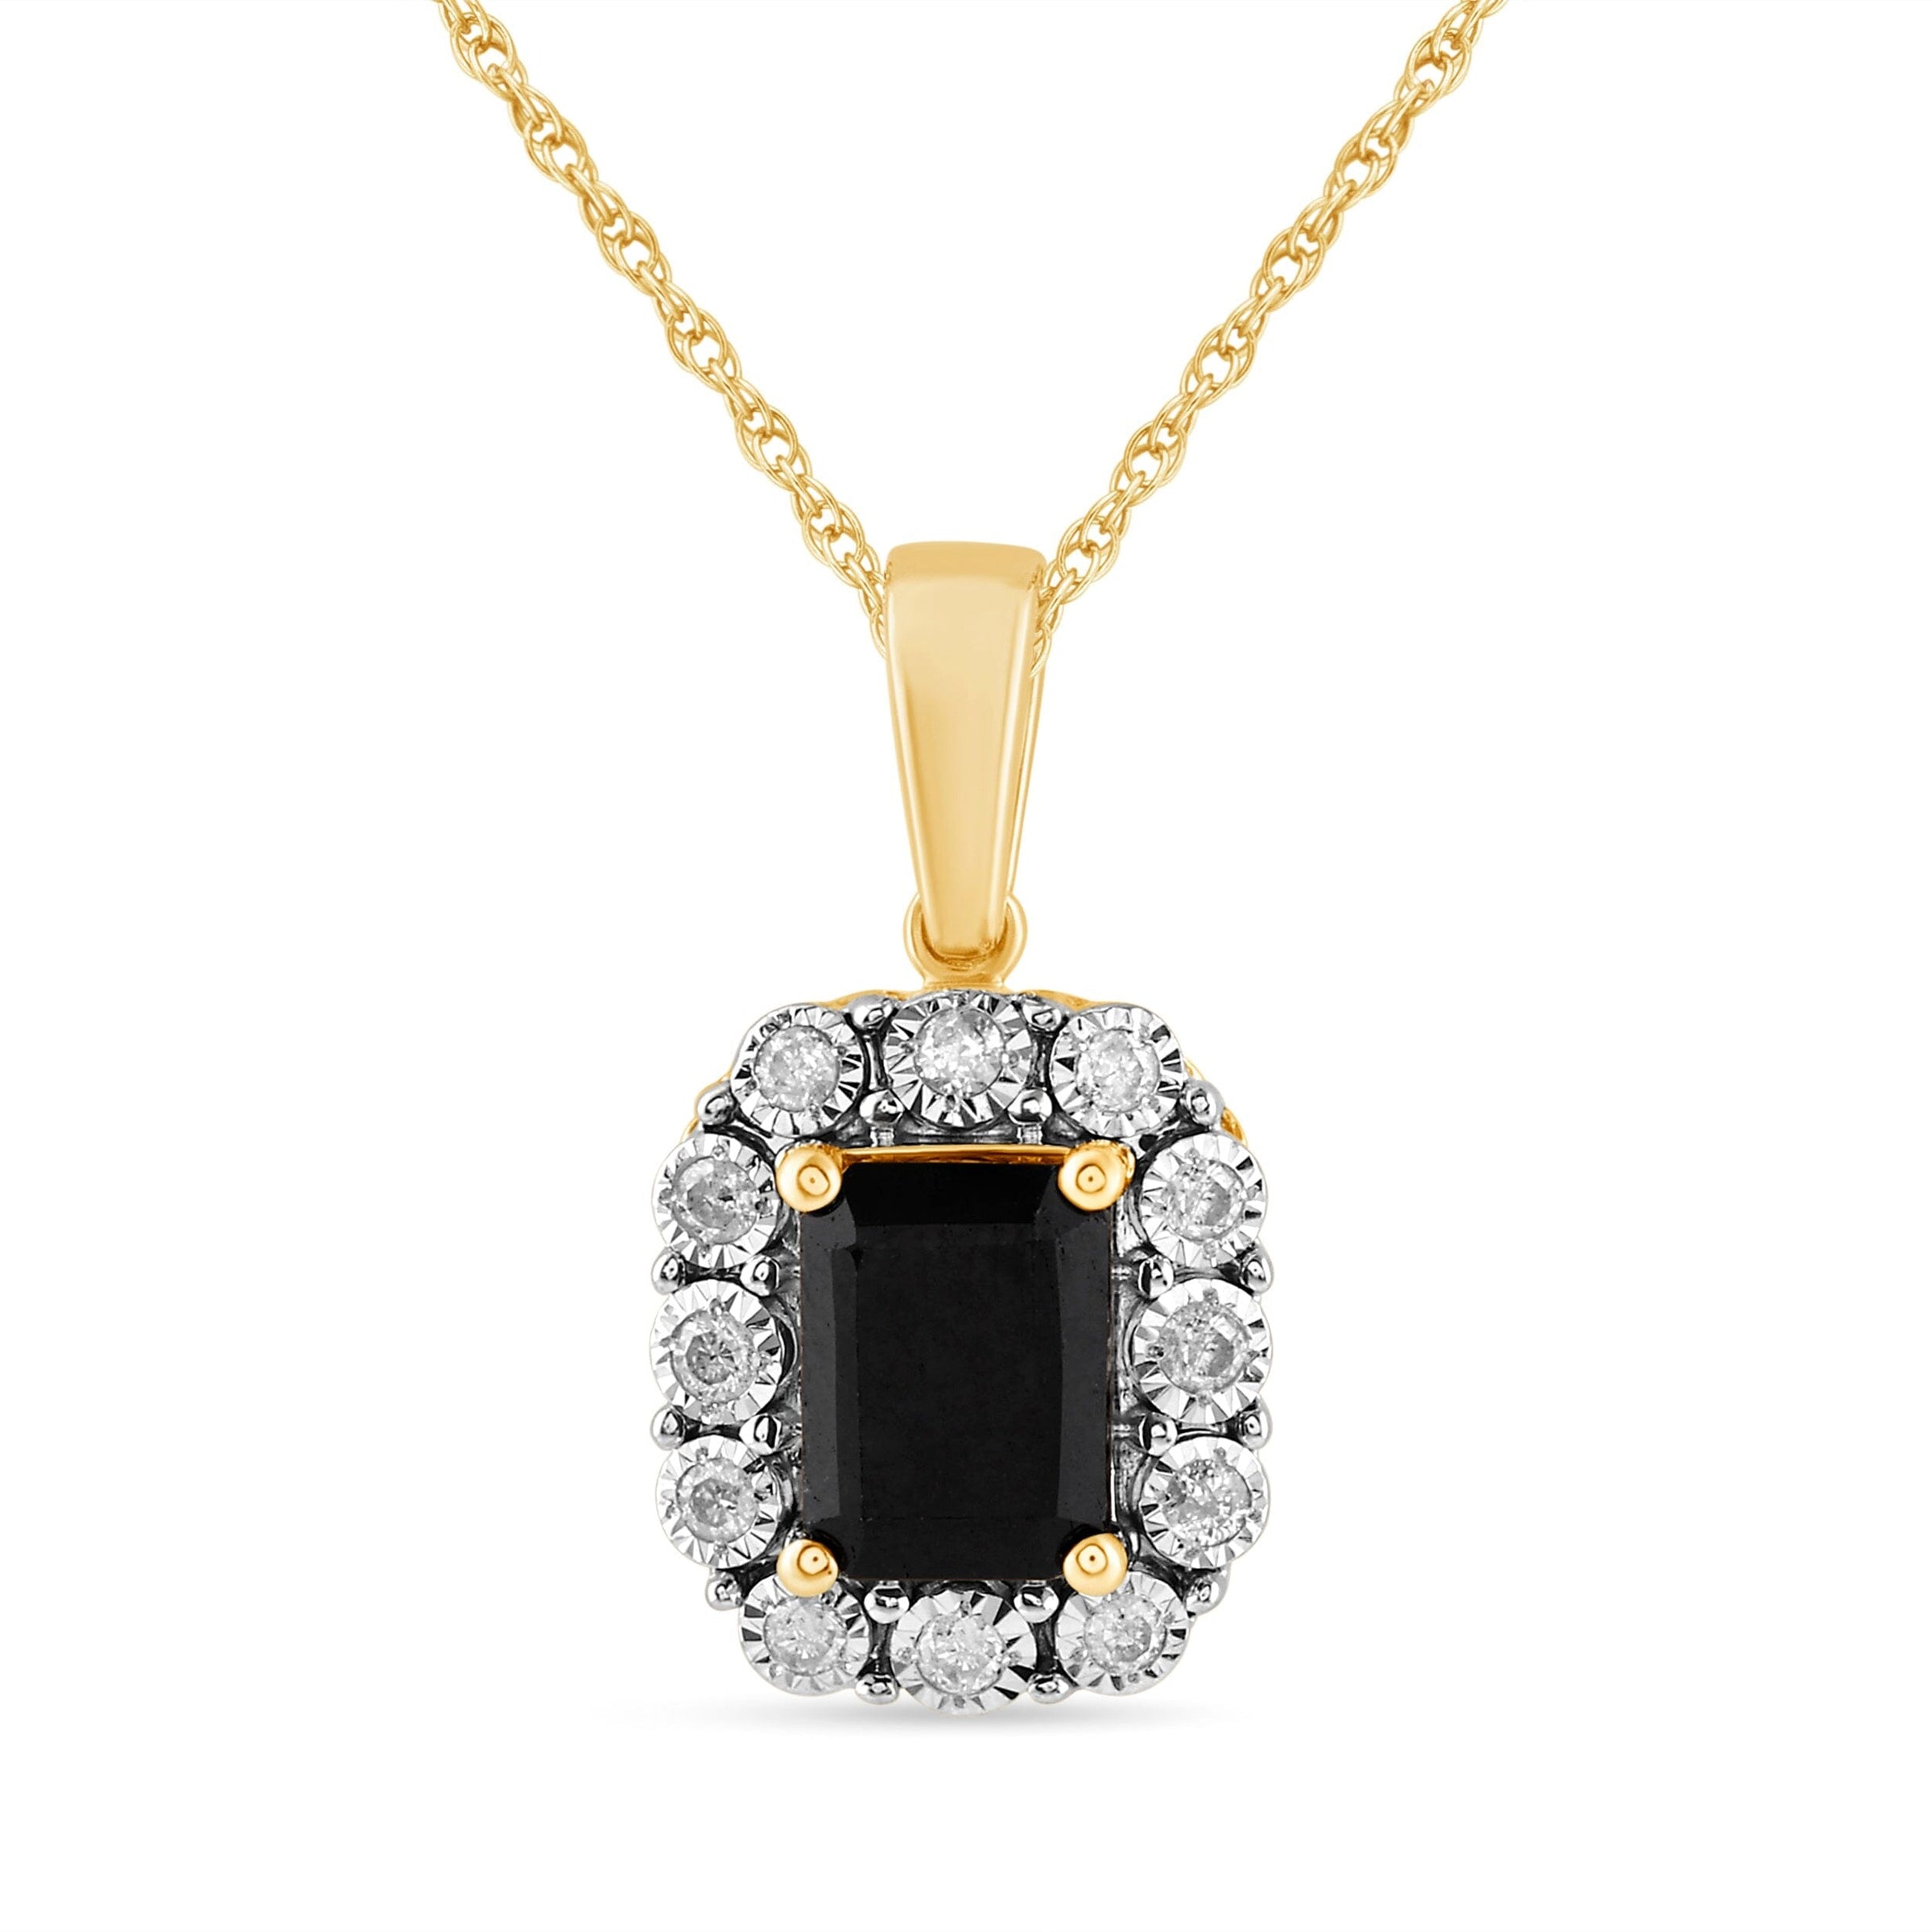 Emerald Cut Sapphire Necklace with 0.15ct of Diamonds in 9ct Yellow Gold Necklaes Bevilles 